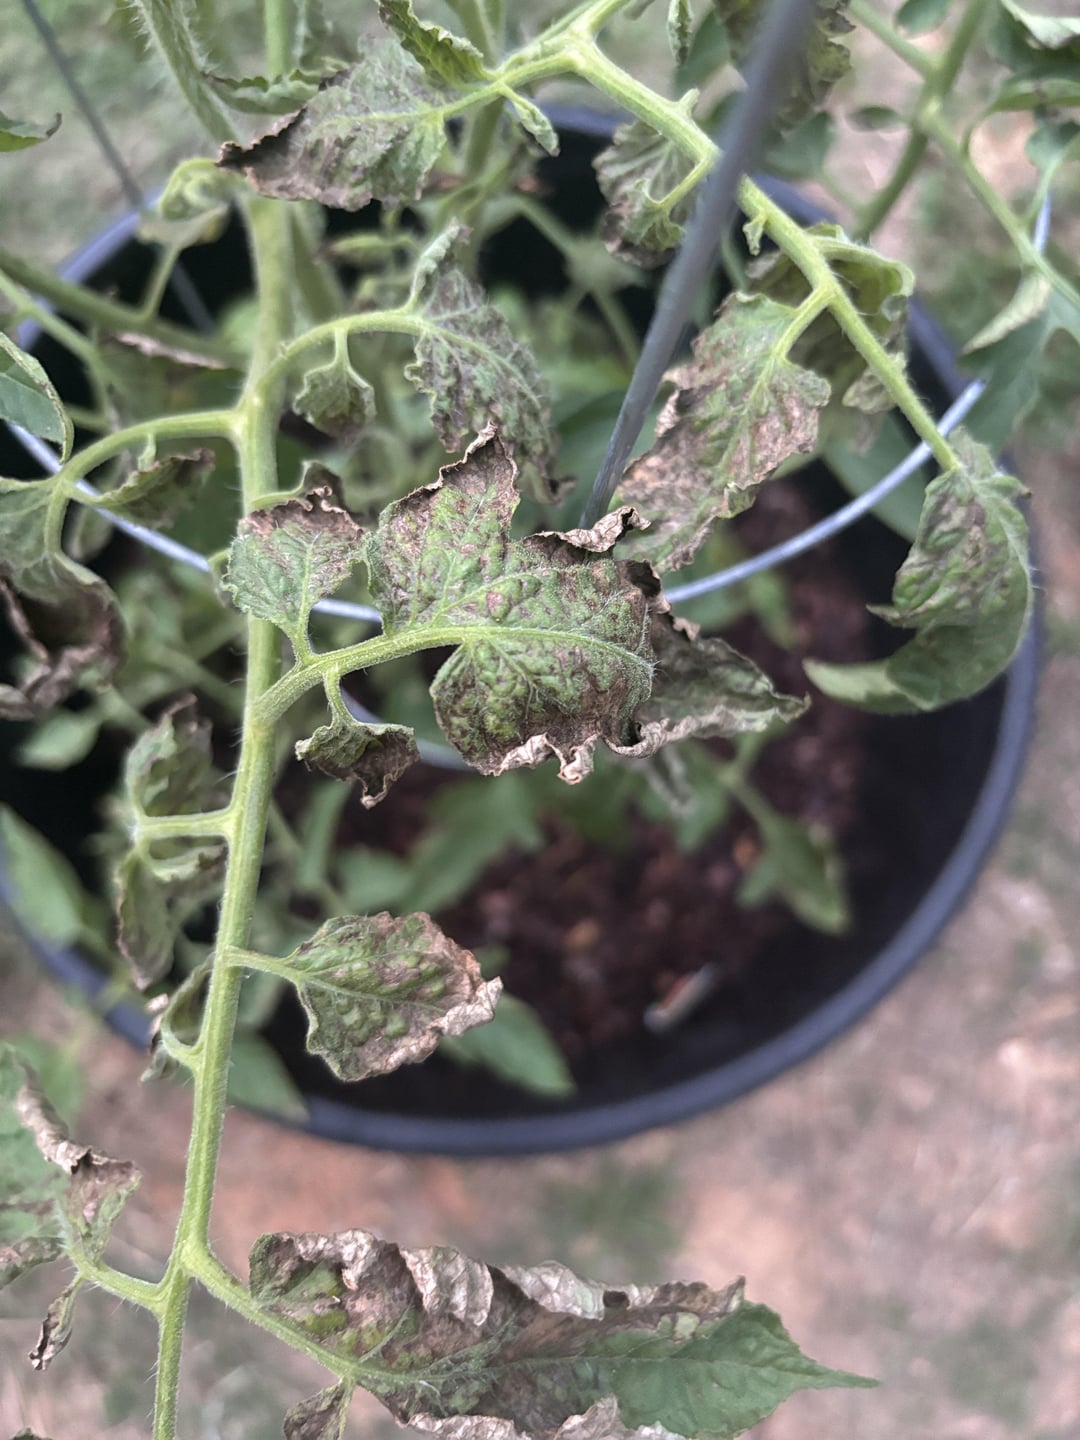 Question about tomato plant. - Dining and Cooking